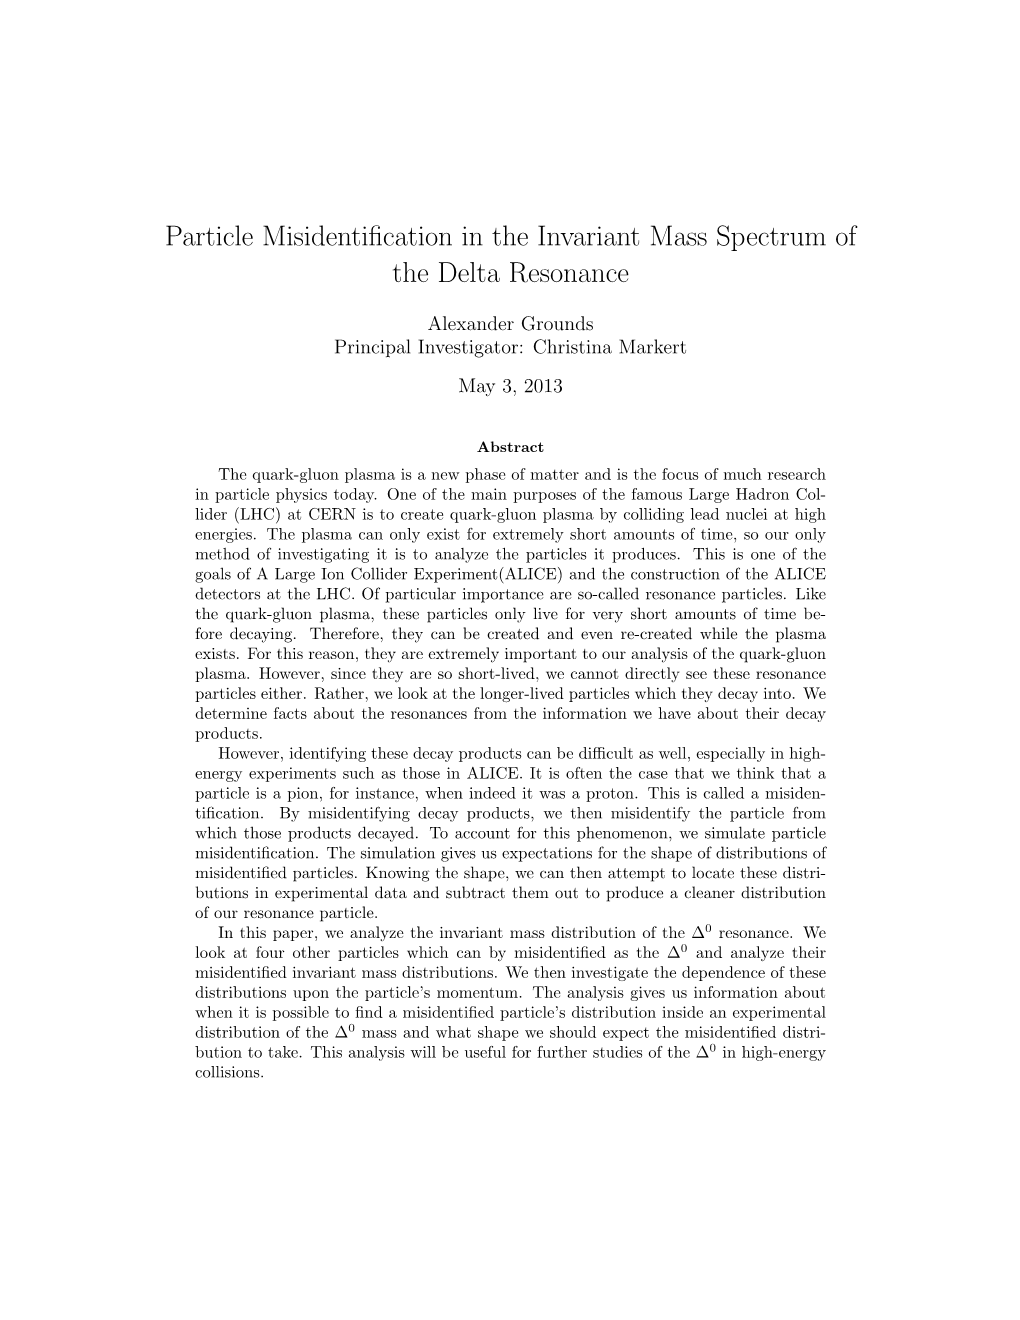 Particle Misidentification in the Invariant Mass Spectrum of The